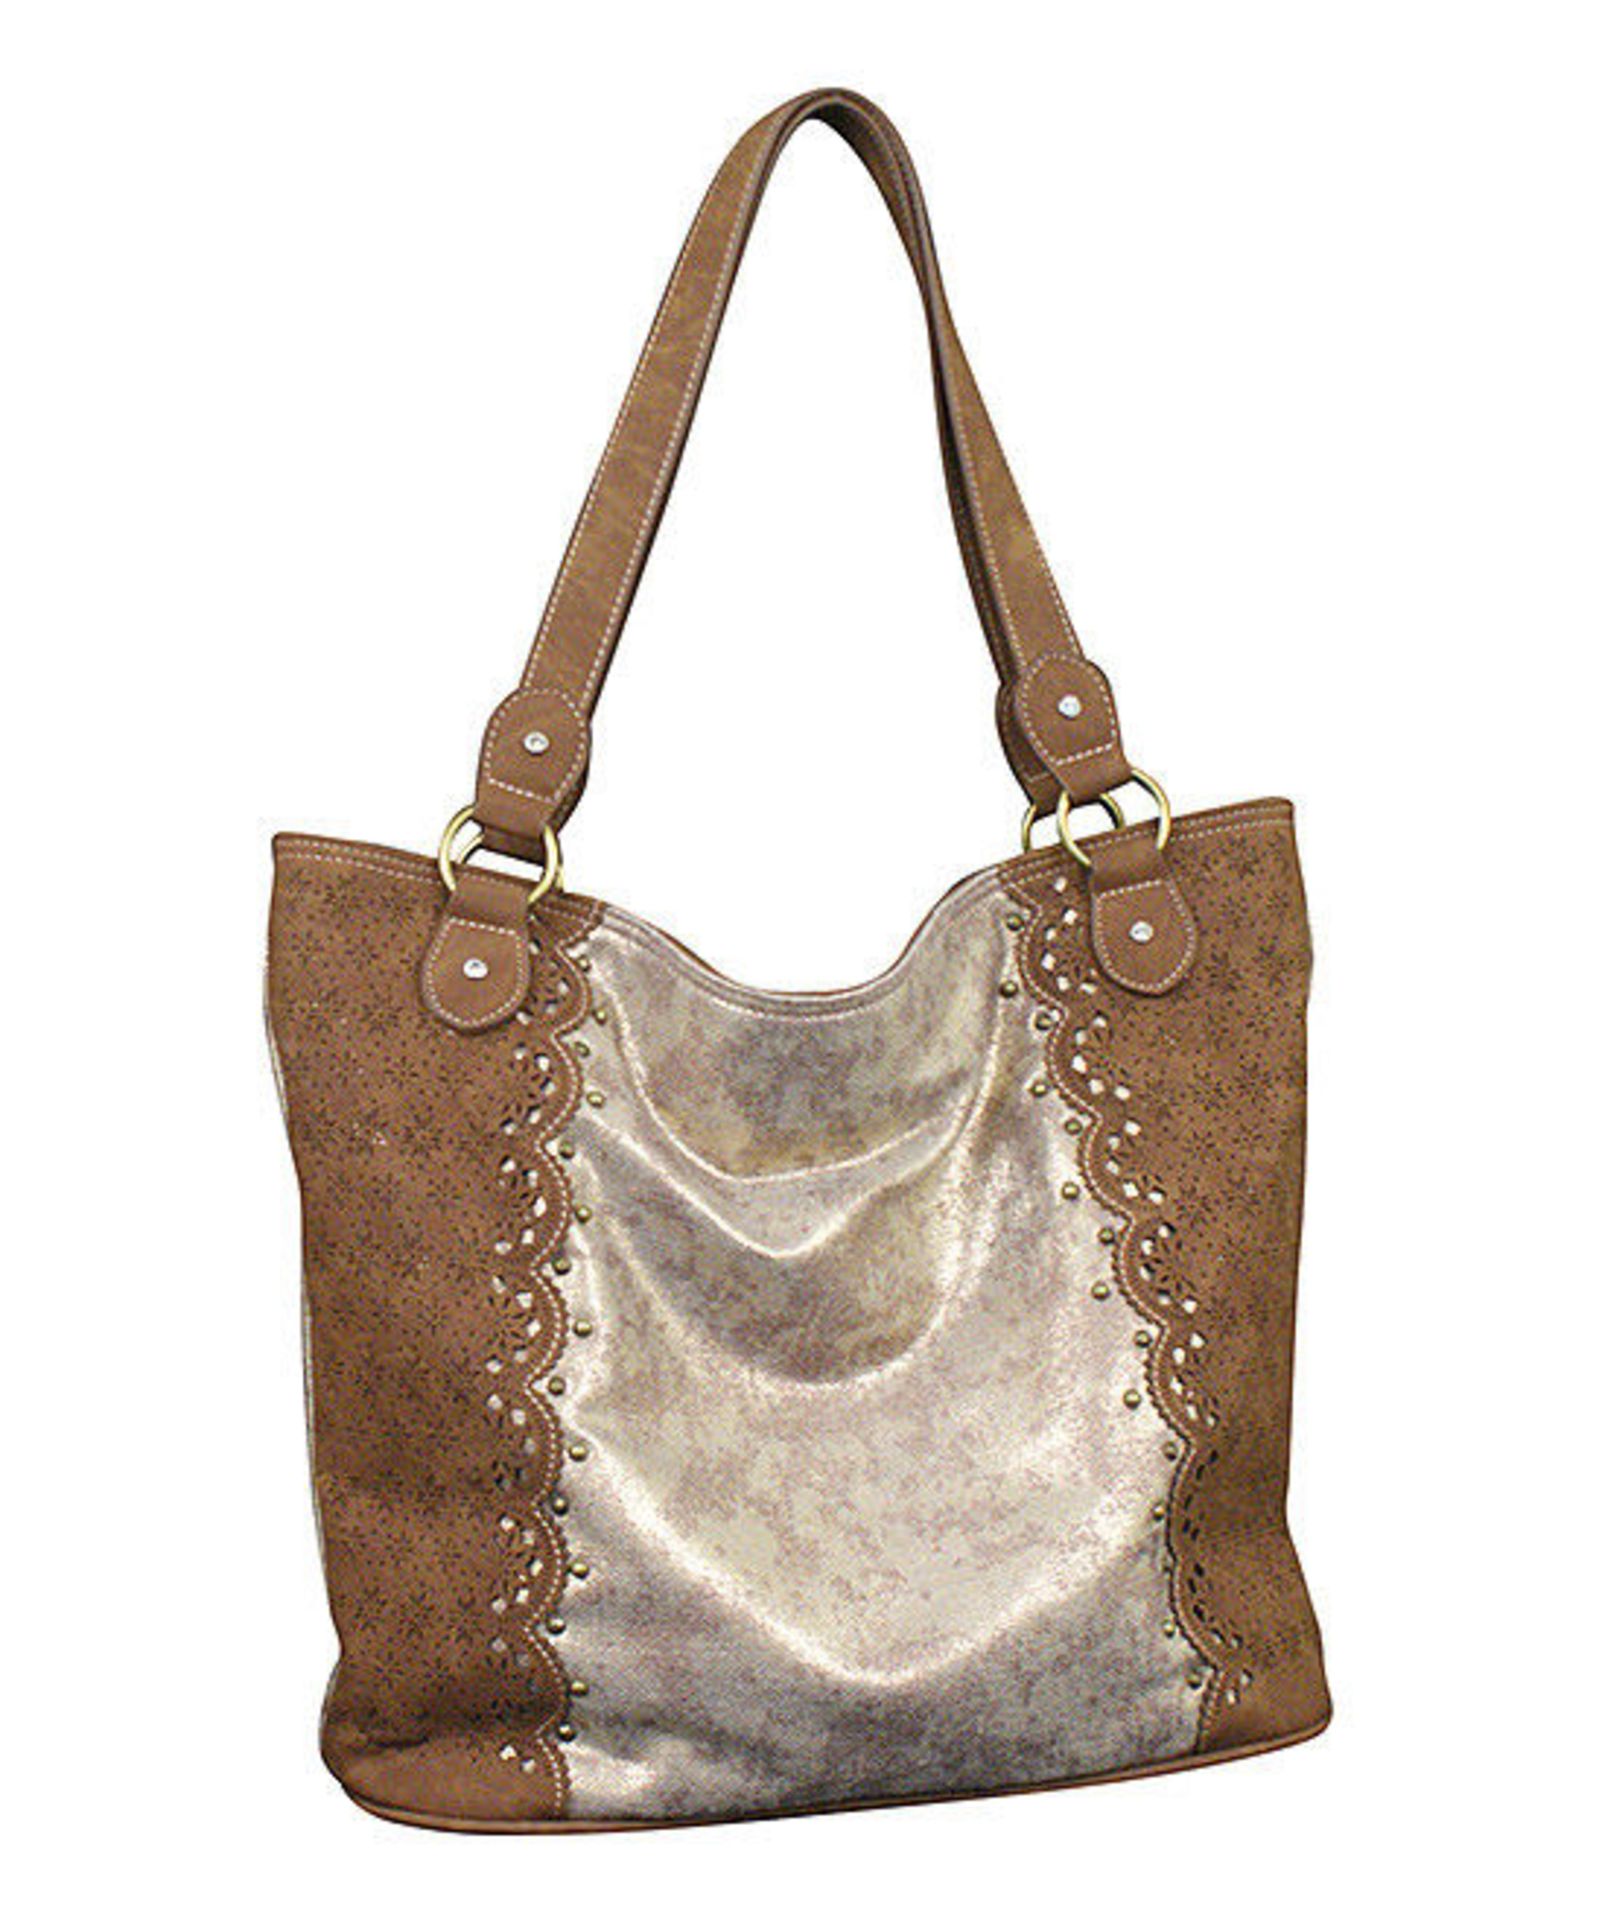 Way West Tan Metallic Vintage Piper Tote (New With Tags) [Ref: 48560123-Tf-Tub 2-Tf]